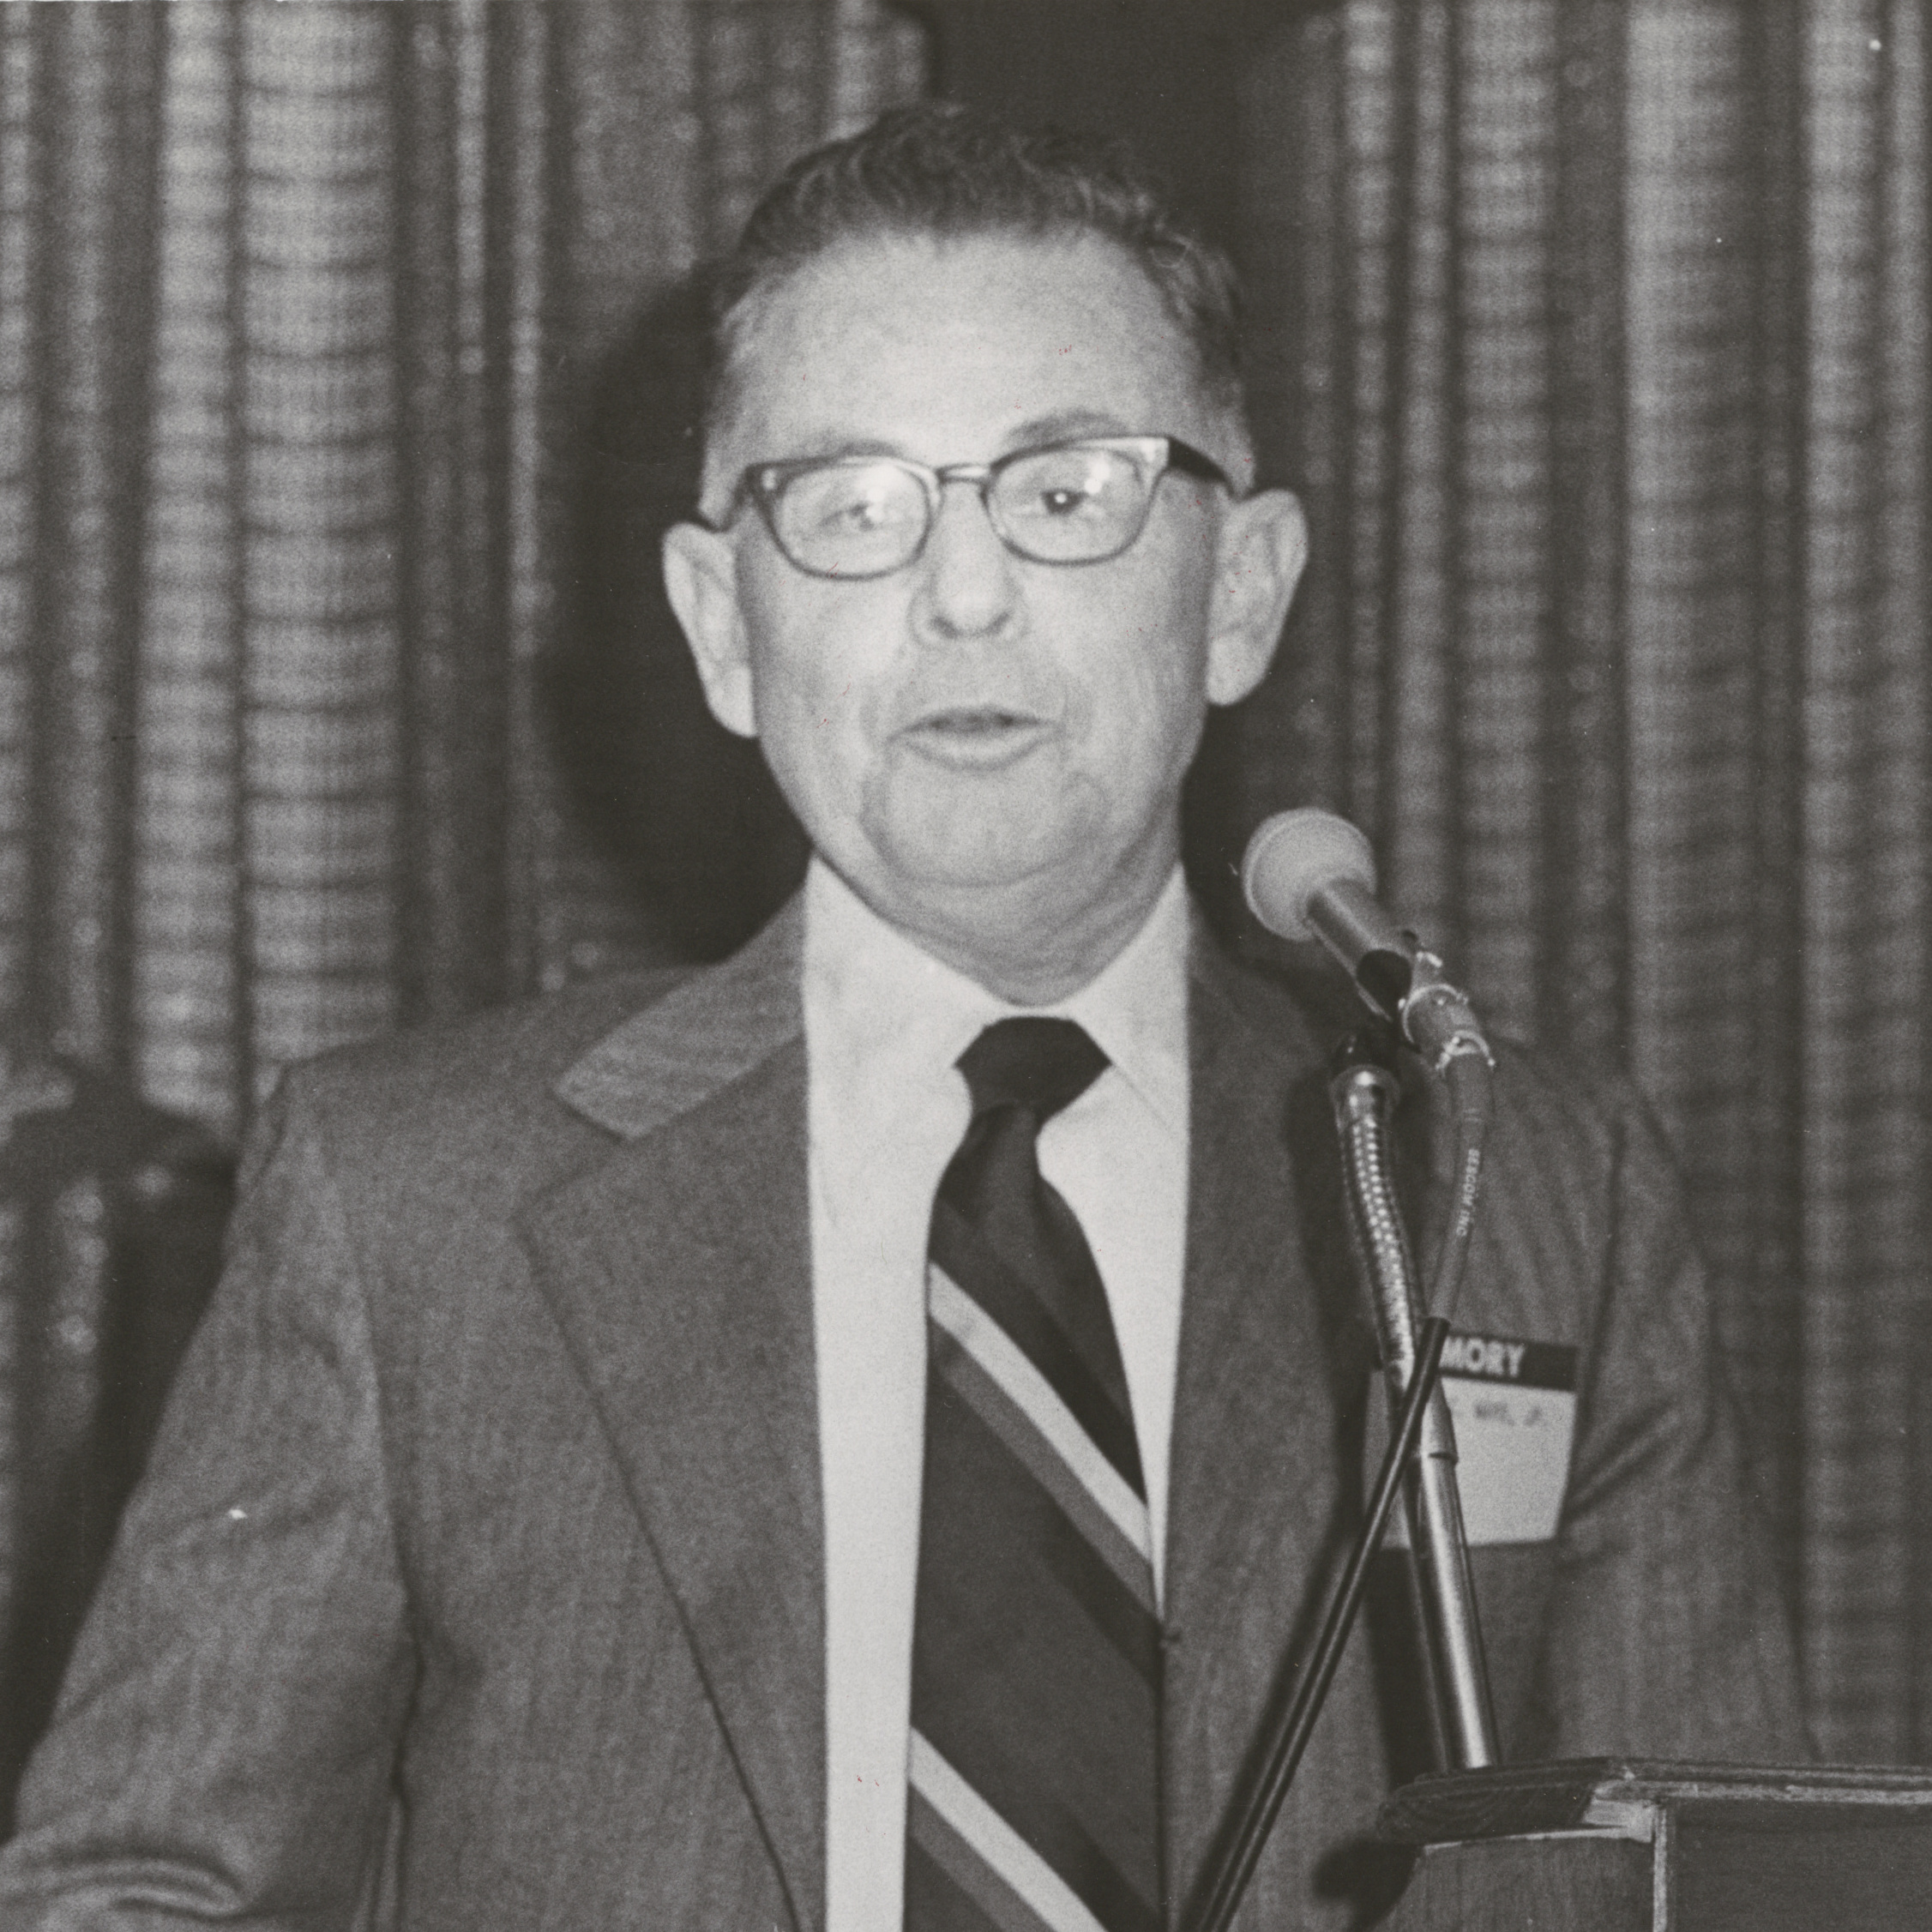 Judson C. Ward, man in glasses and suit, speaking into microphone at podium